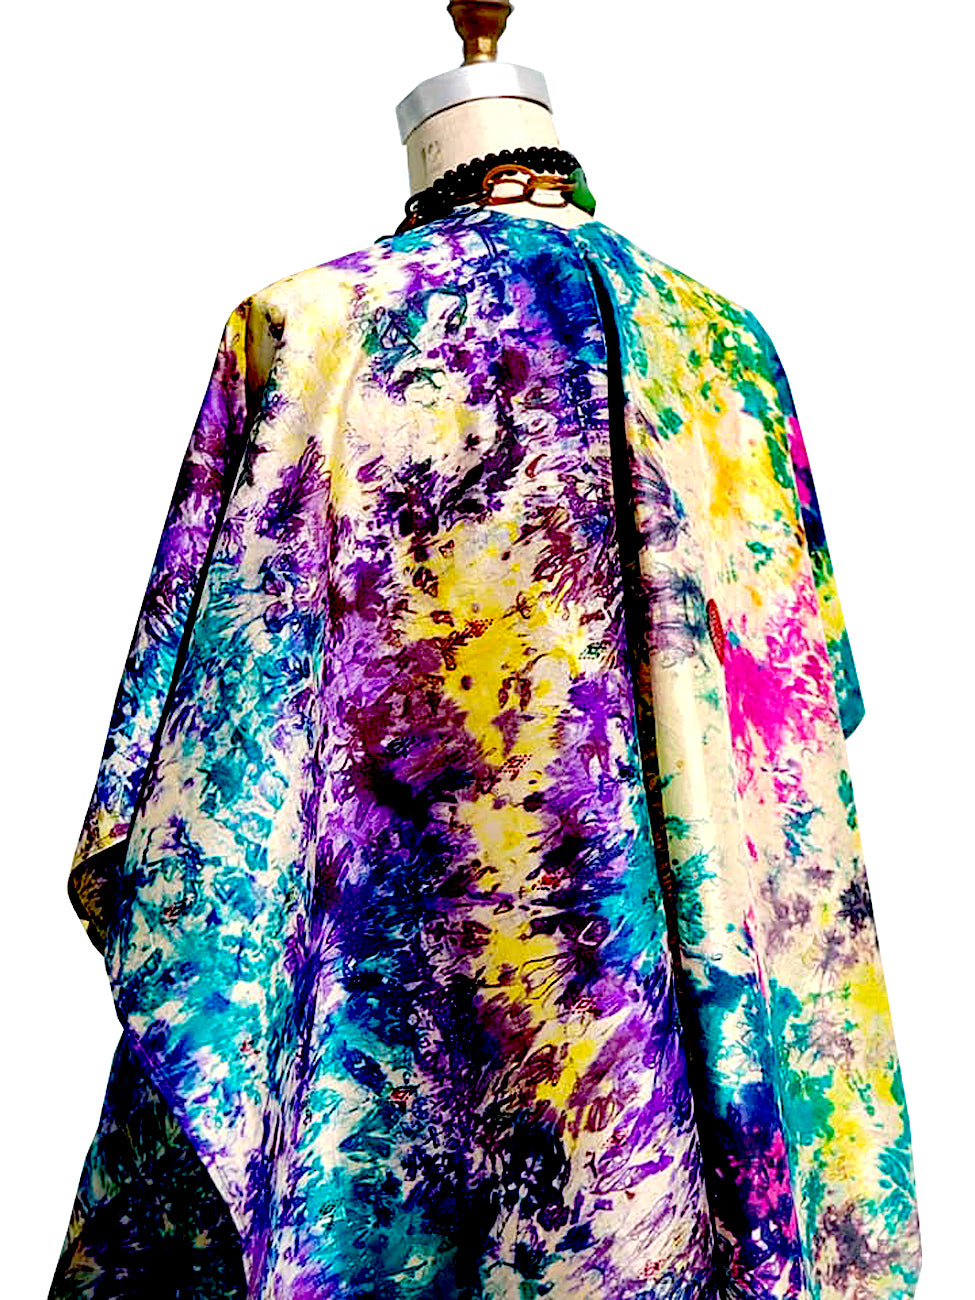 Silk Cape Almost Famous Collection - Jackson Pollock